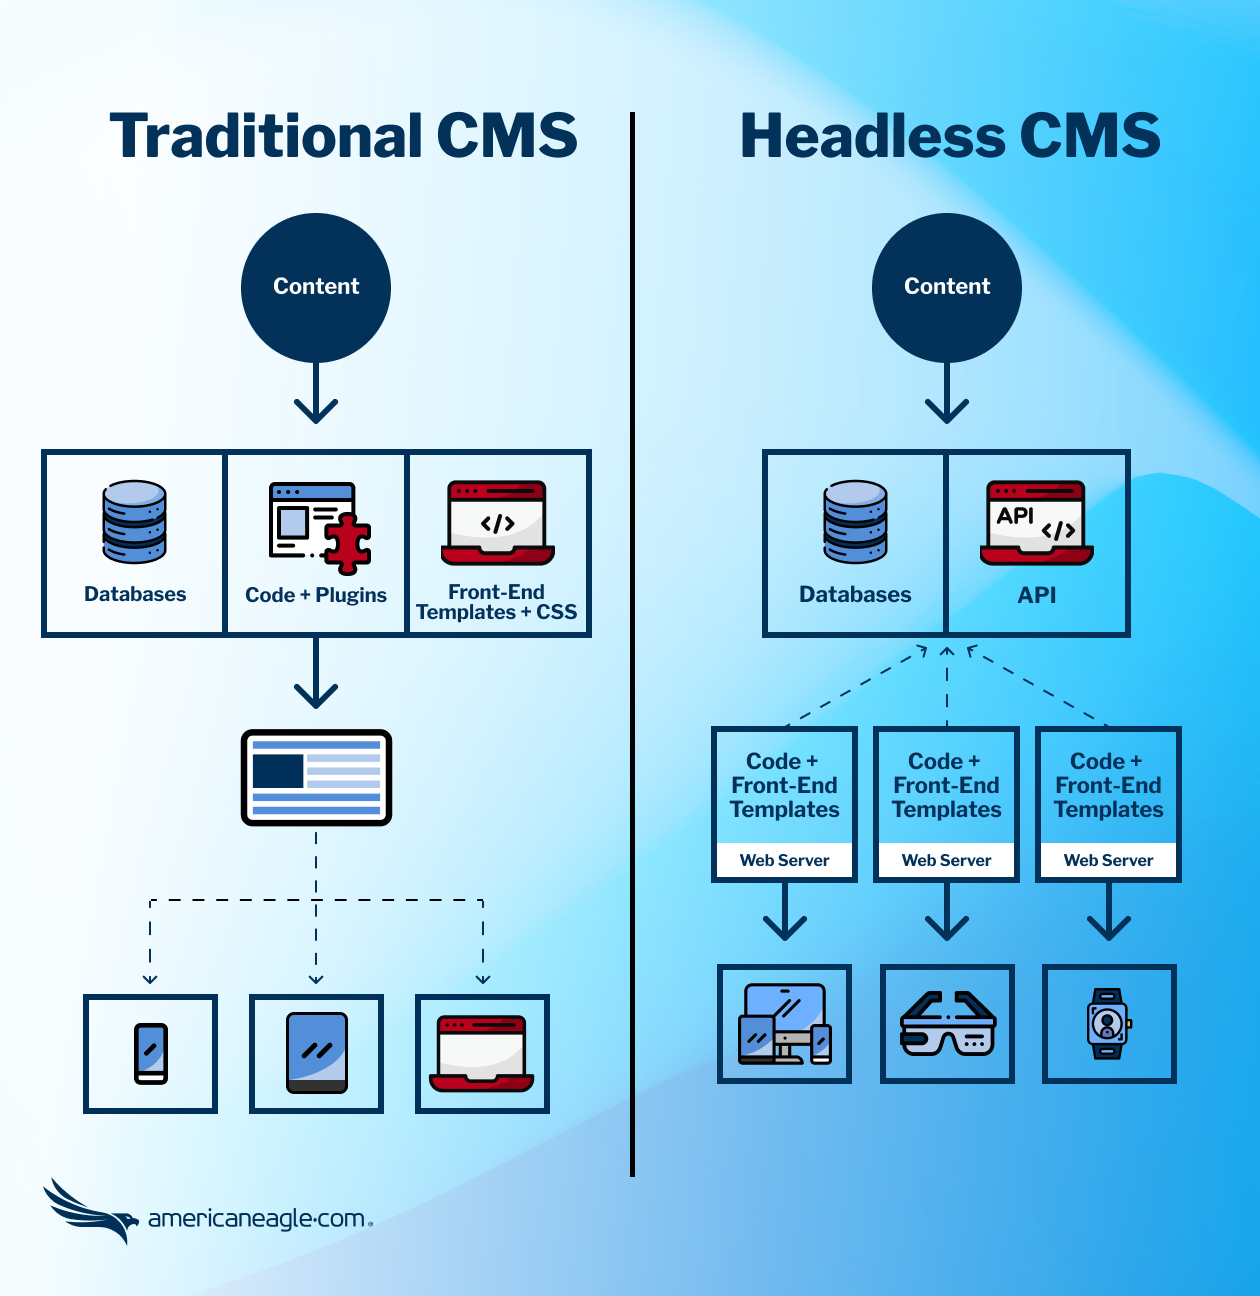 Comparative infographic of Traditional vs Headless CMS, outlining content flow through databases, code, and front-end templates.